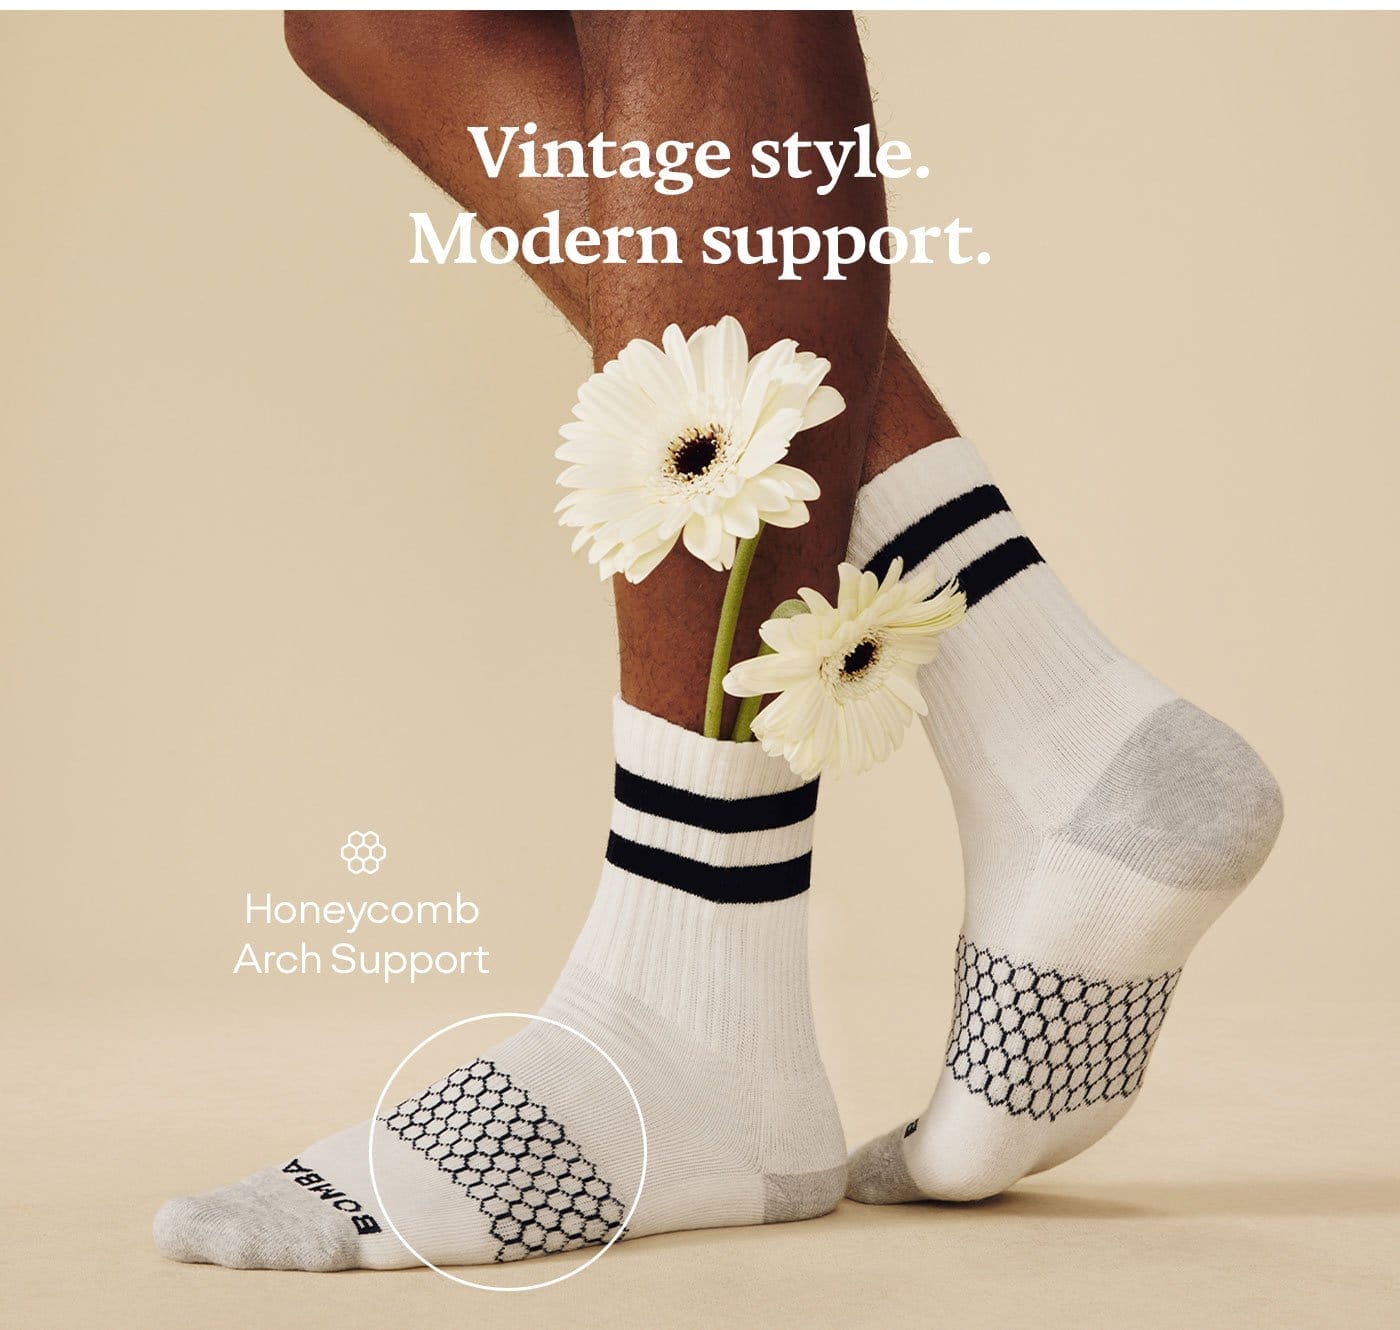 VINTAGE STYLE. | MODERN SUPPORT. | HONEYCOMB ARCH SUPPORT 